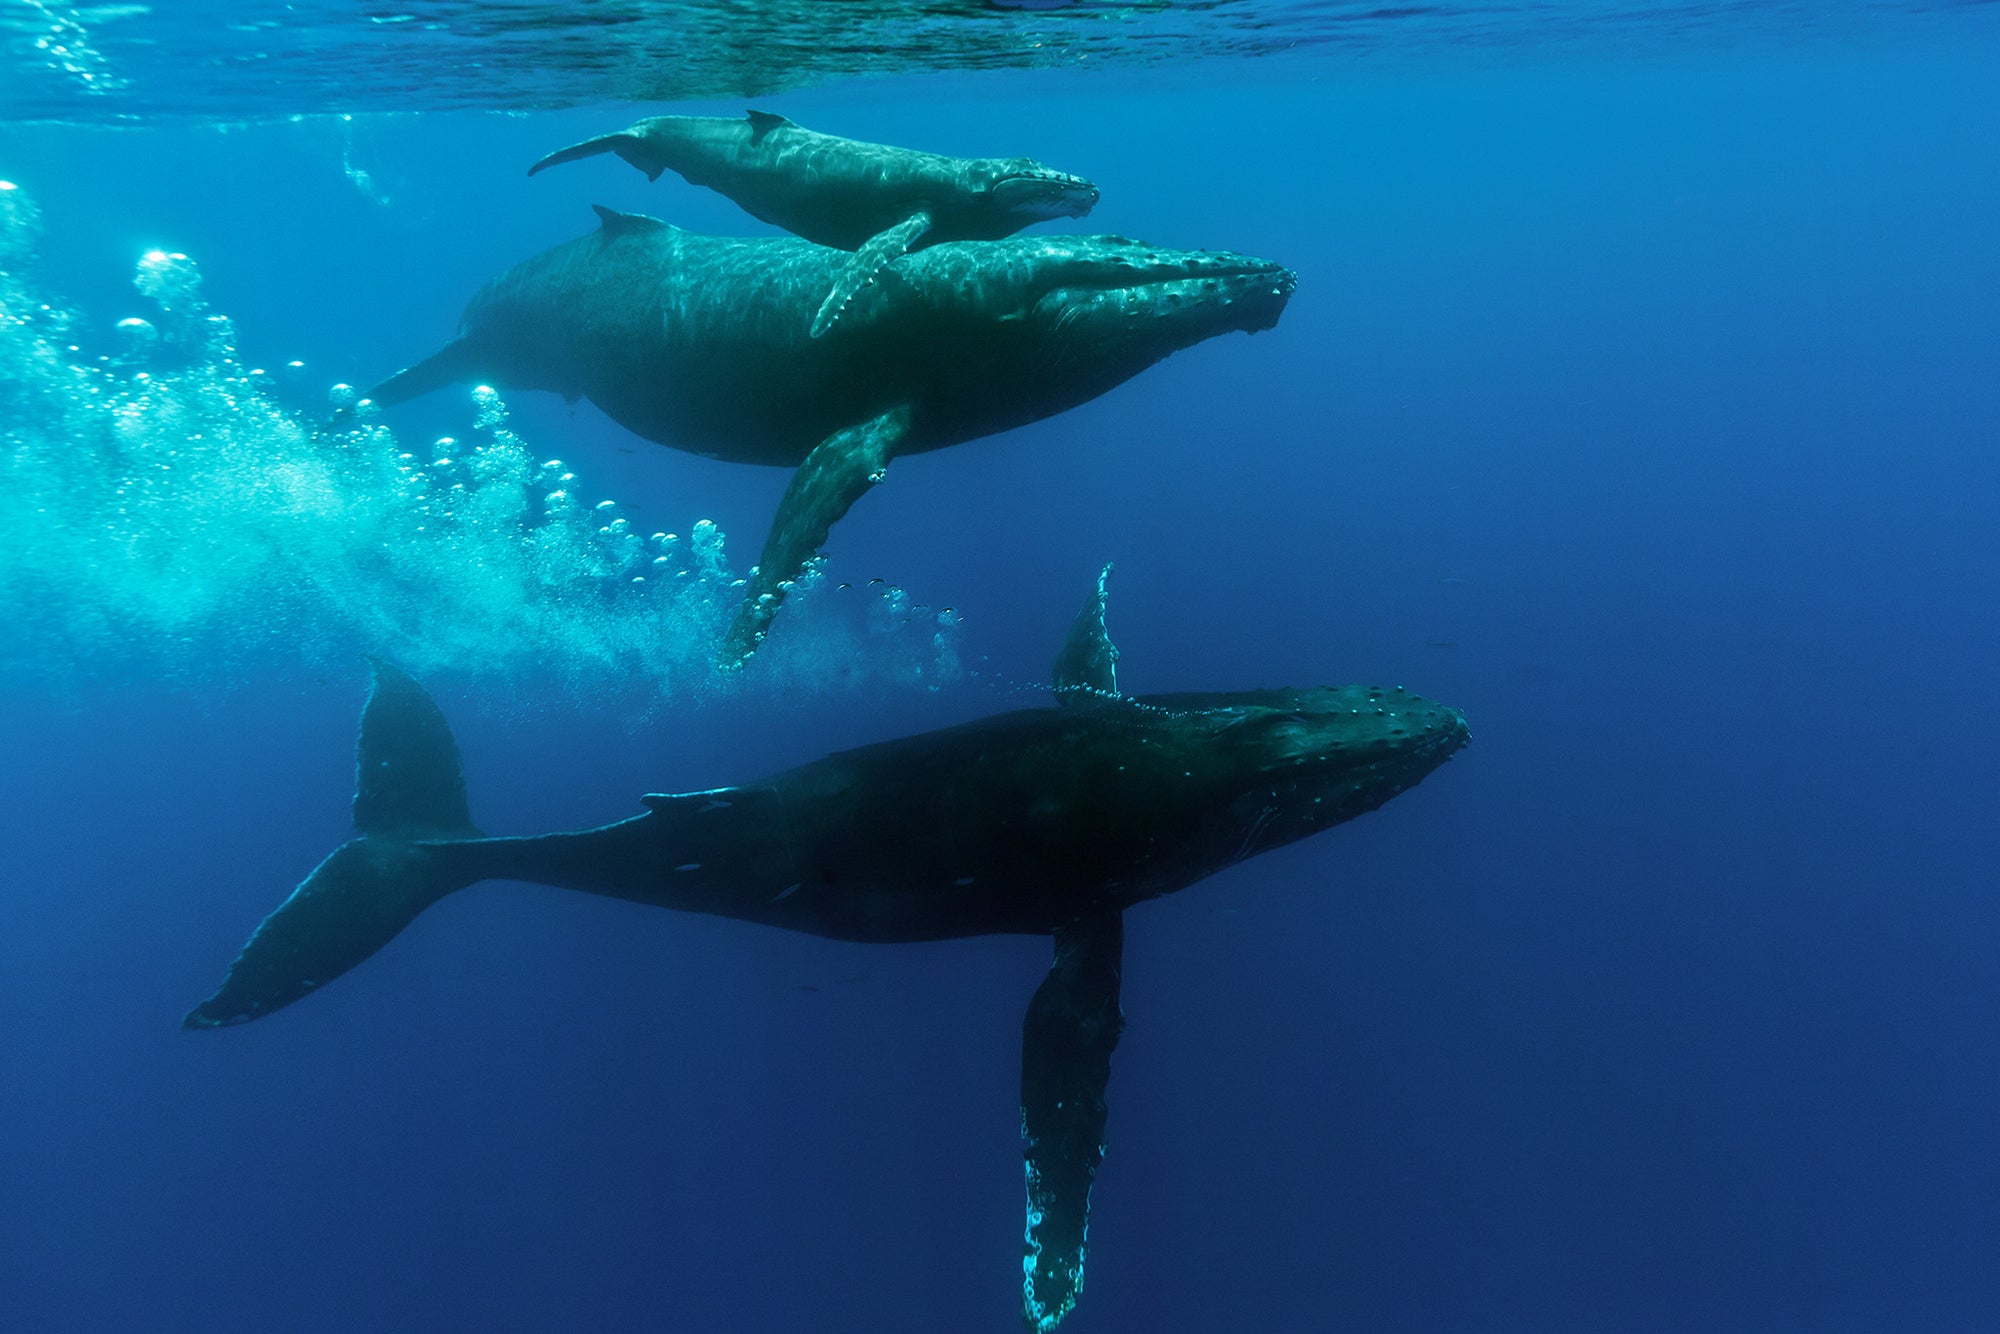 An image of a Mother, Calf and Escourt Humback Whales taken while doing research with the Kieki Kohola Project on Maui.